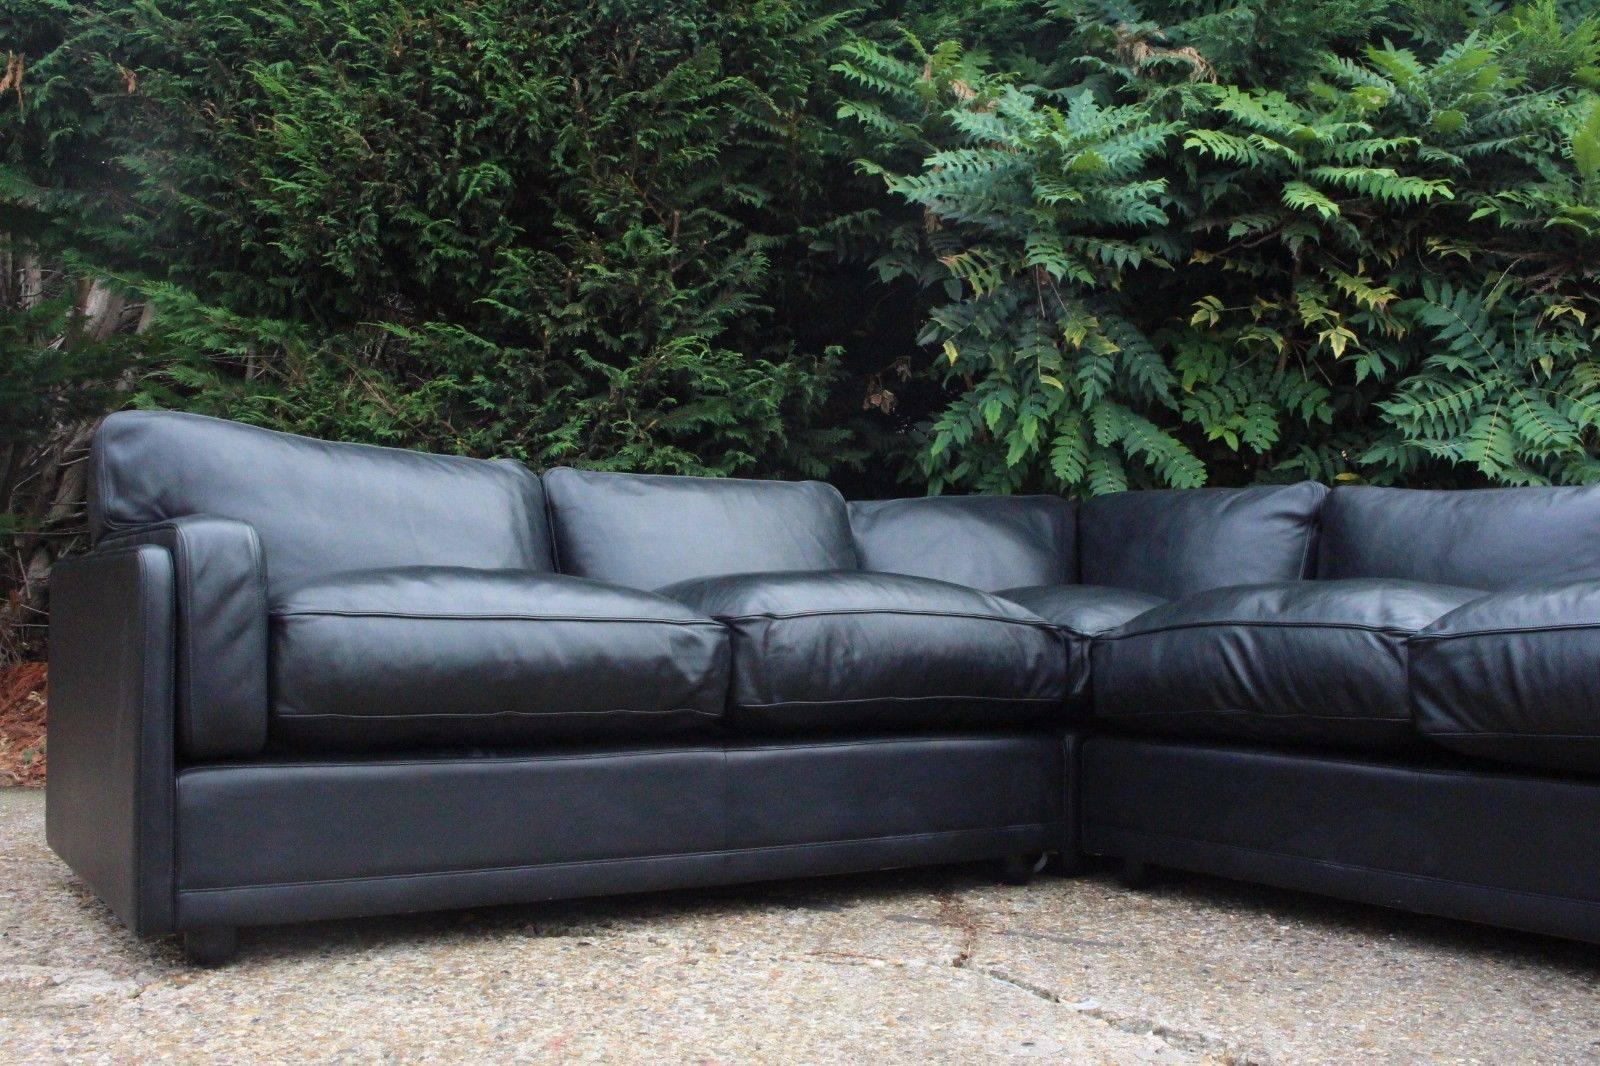 Designer Poltrona Frau Socrate black leather corner sofa suite 
RRP £20 000 current model
high quality pelle smooth leather sofa
seating and back cushions are feather filled for great comfort
in excellent condition, well cared for

The Socrate